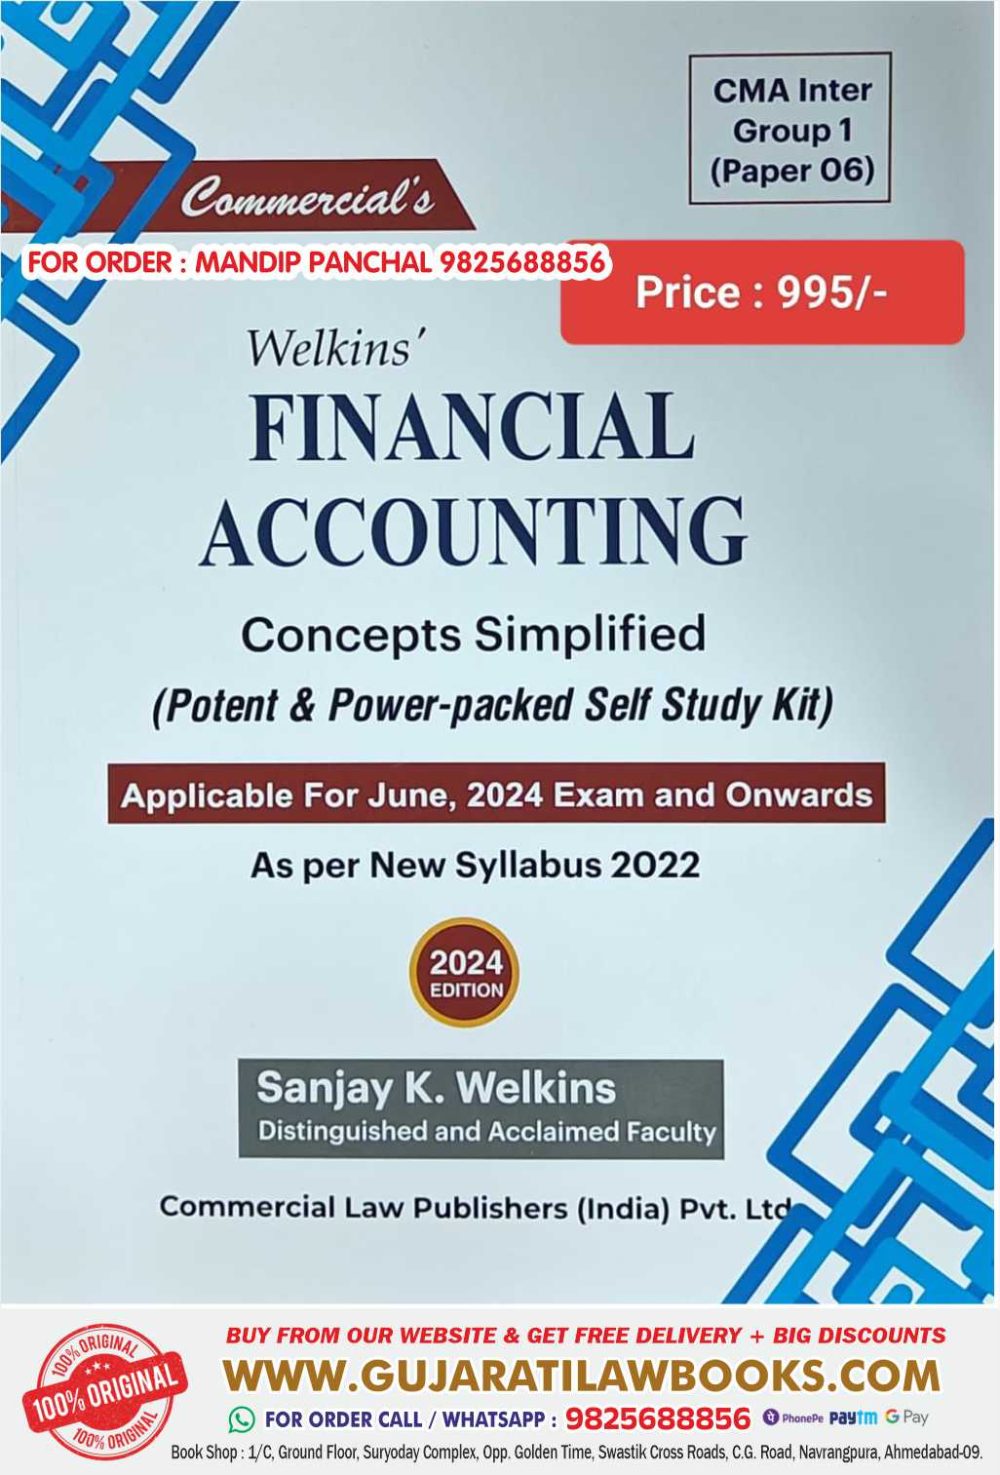 Commercial's WELKIN'S FINANCIAL ACCOUNTING - For CMA Inter Group 1 - For June & Onwards 2024 Examination